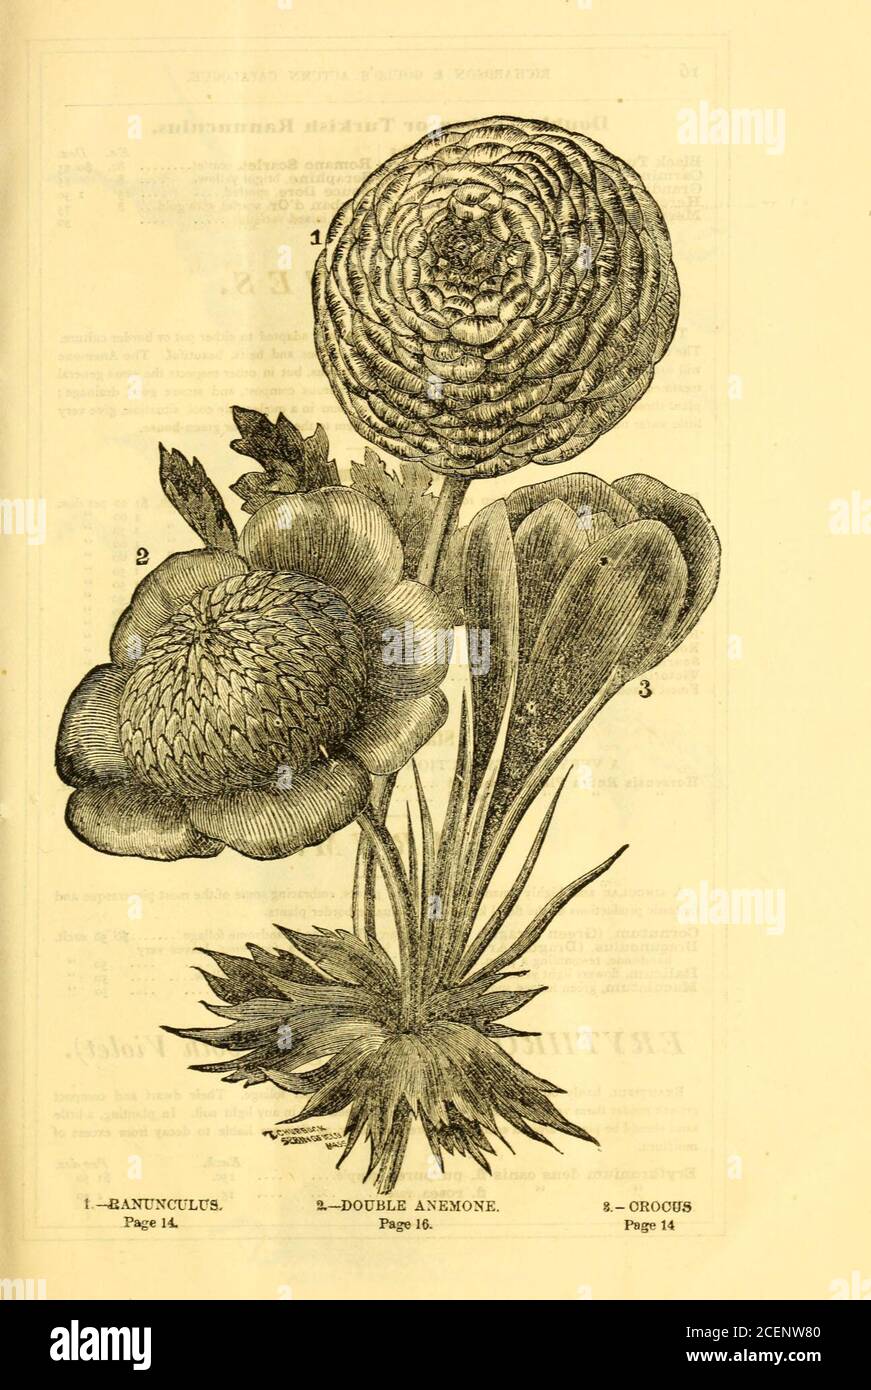 . Richardson & Gould's autumn catalogue of bulbs and flowering roots, small fruits and garden requisites. dry-litter or leaf mould, which should be removed previous to the plants appearing above the ground. Itis necessay to water them freely, and maintain a uniform moist surface in dry seasons, as the Ranun-culus forms its roots near the surface, and is unable to withstand a dry parched soil. In watering donot wet the leaves, but soak the bed well twice a week in dry, hot weather. When the foliage hasbecome quite yellow, the tubers should be lifted, gradually dried, and placed away in a cool a Stock Photo